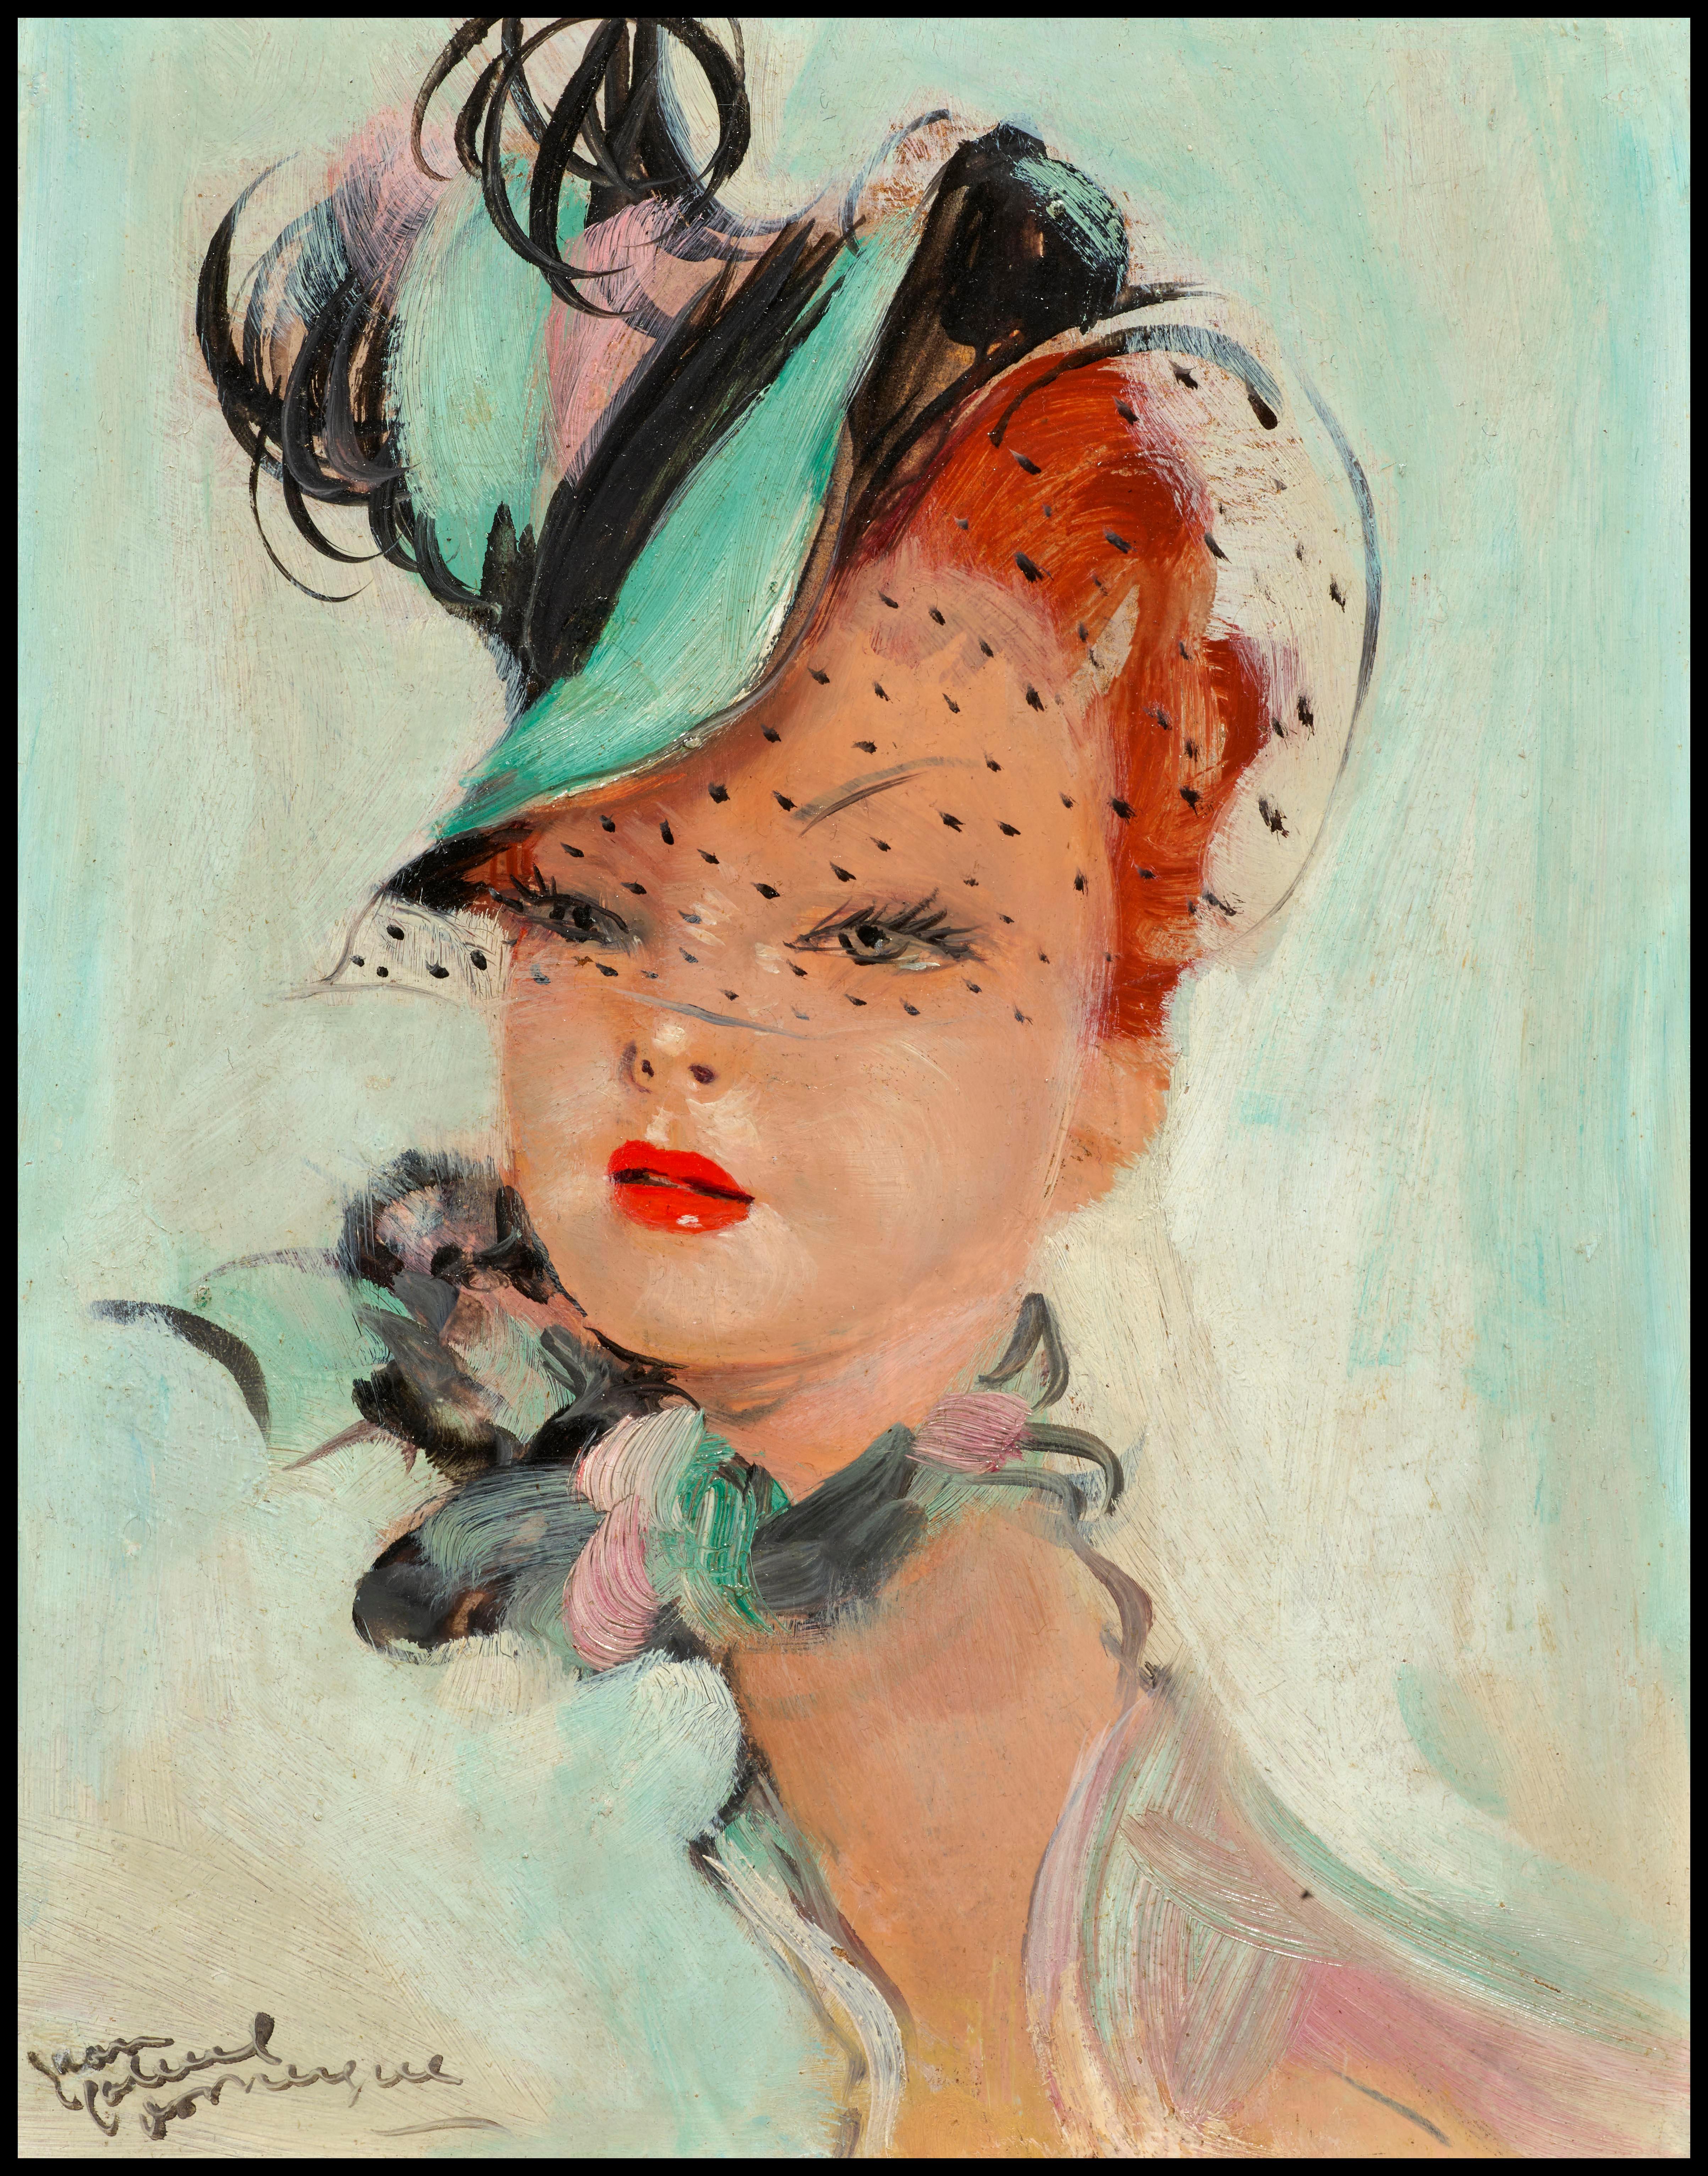 Lida - Painting by Jean-Gabriel Domergue